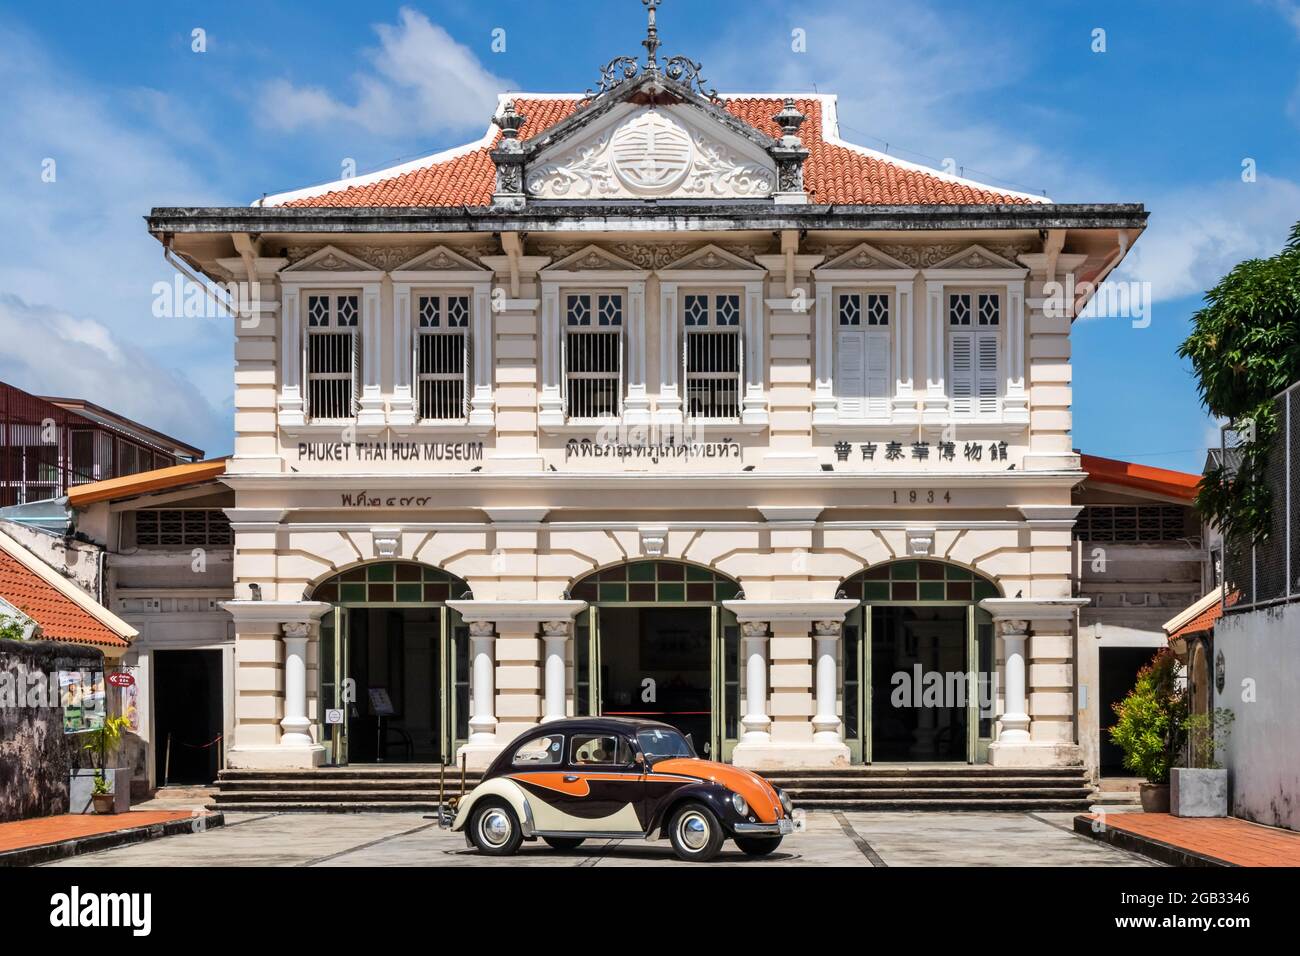 Phuket, Thailand - November 24th 2020: Volkswagen Beetle outiside the the Thai Hua museum. Stock Photo